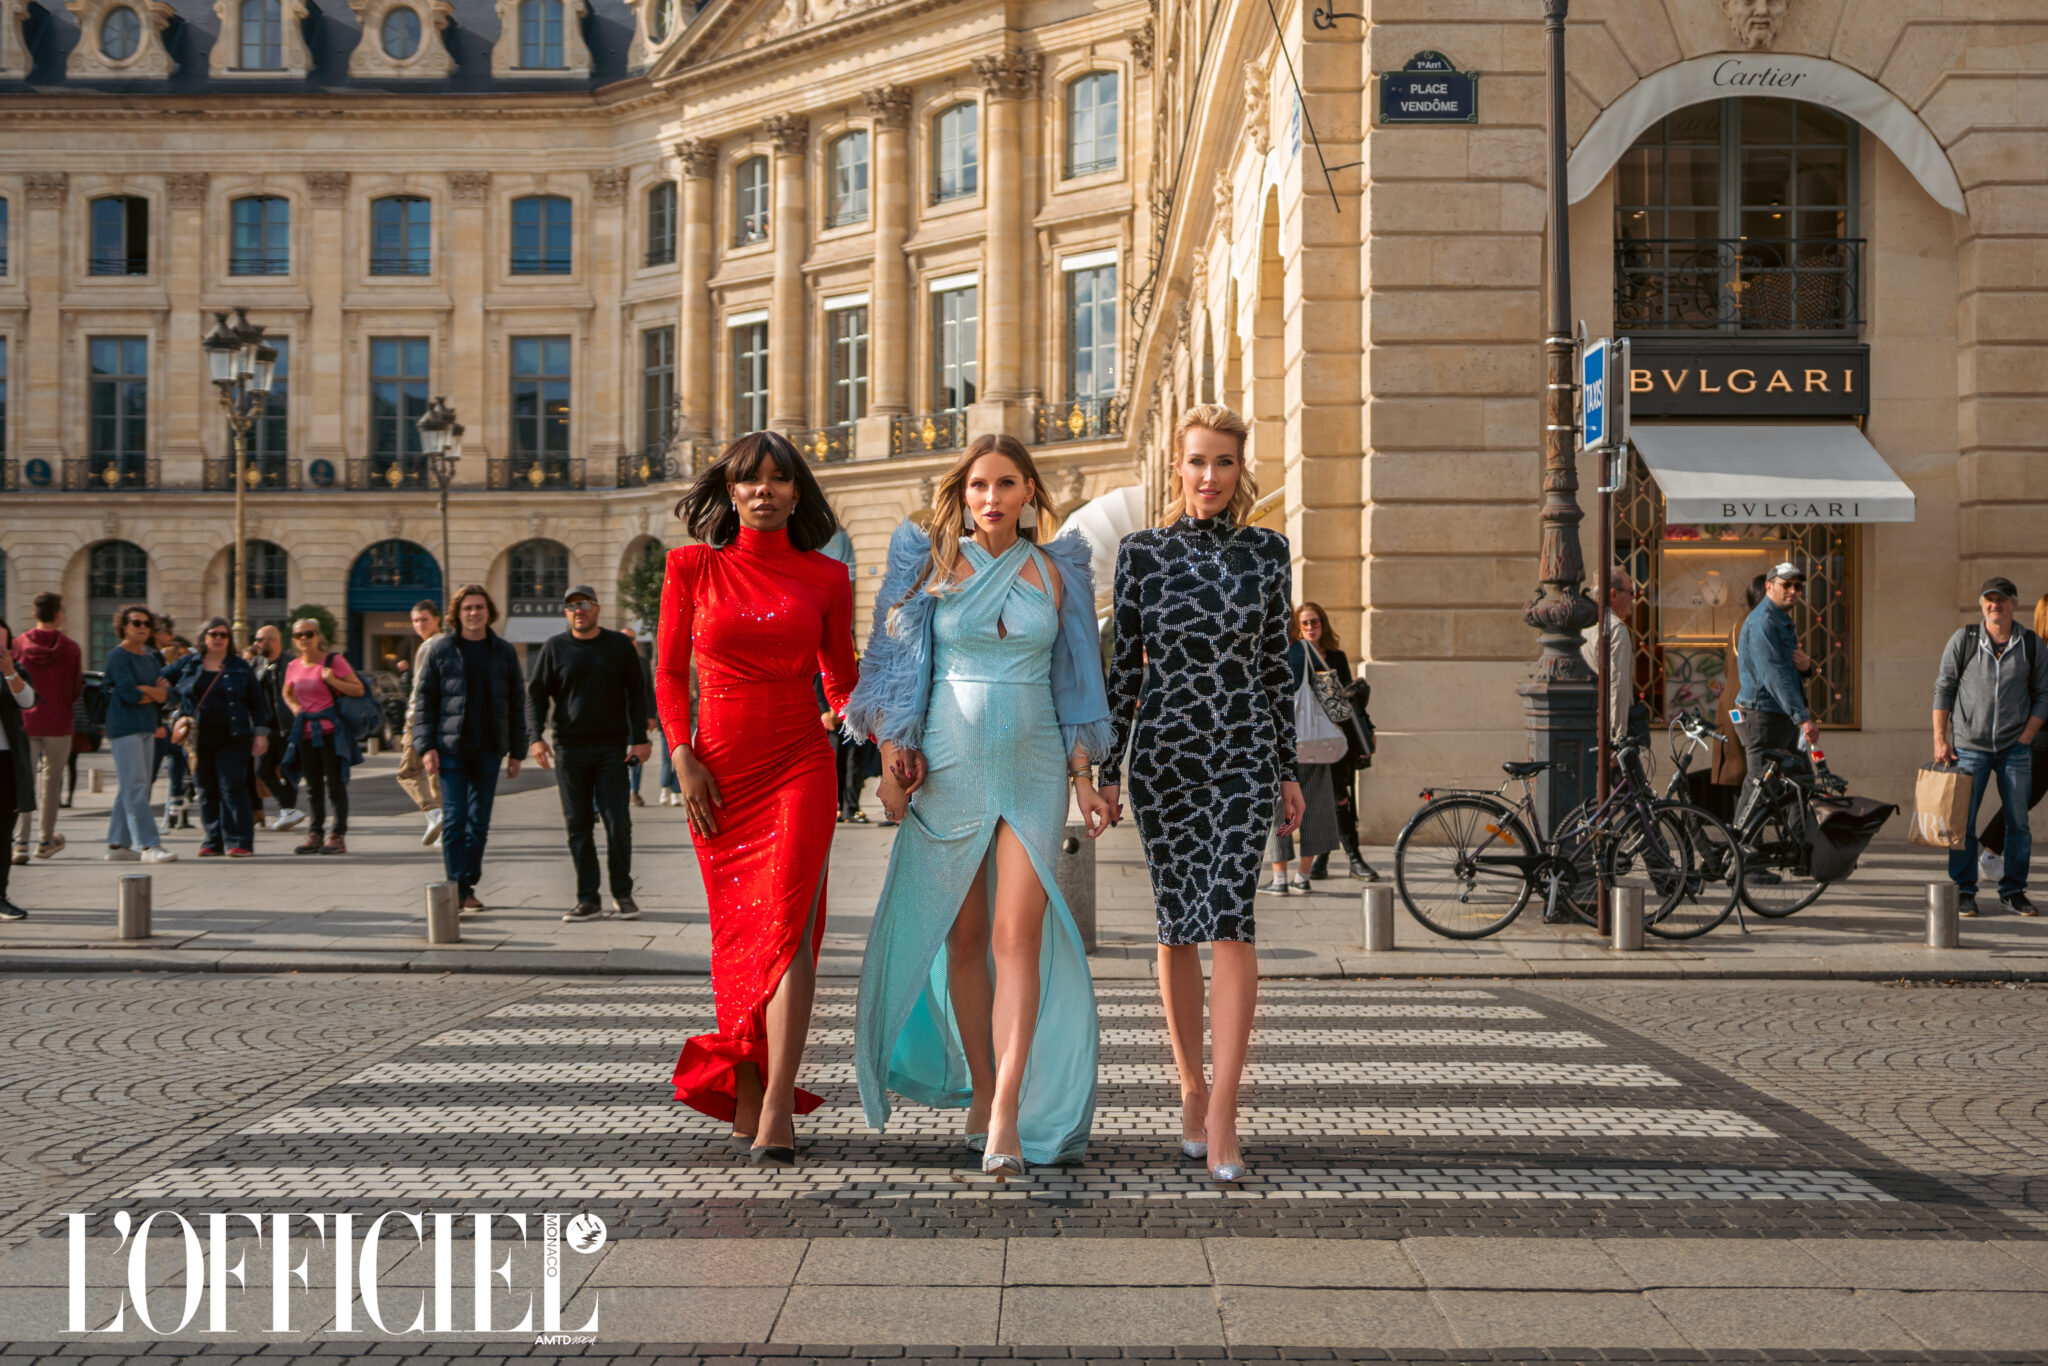 Feature at L'Officiel Monaco during Paris Fashion Week SS 23. Visual Fashion Story from the magical Paris. Featuring: Nicolas Besson, Gemy Maalouf, Charriol, Sol Angelann and more. 24